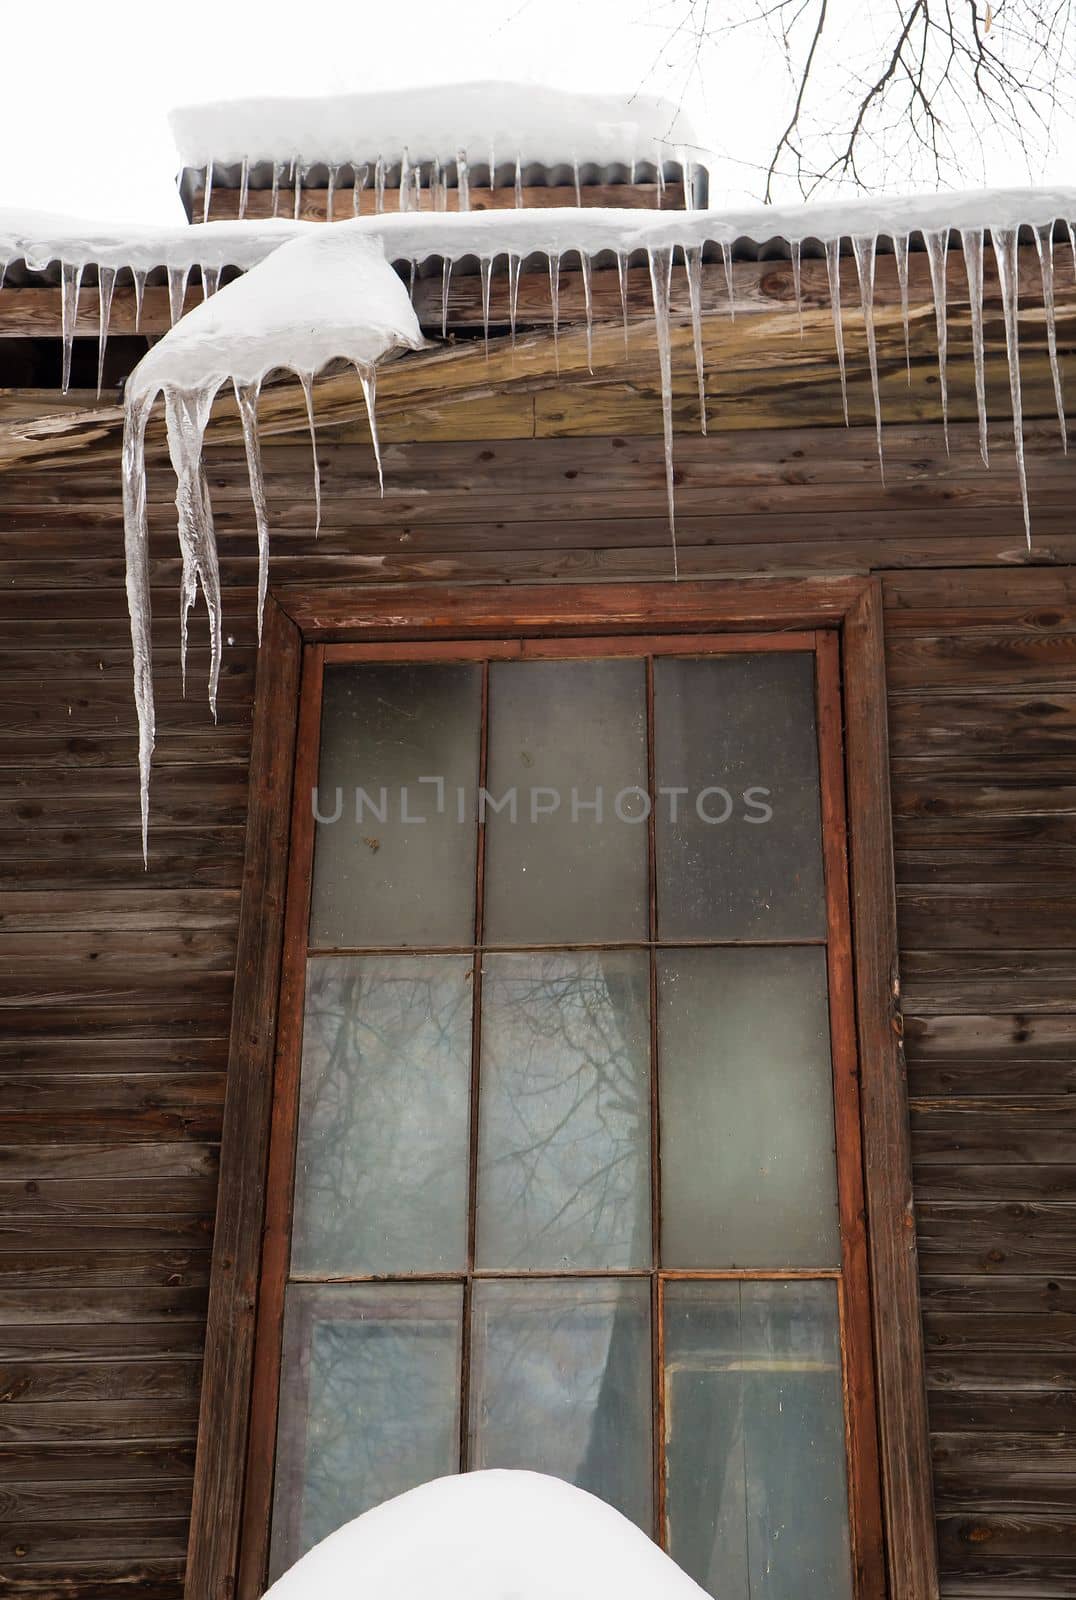 Icy, small icicles hang on the edge of the roof, winter or spring. by anarni33